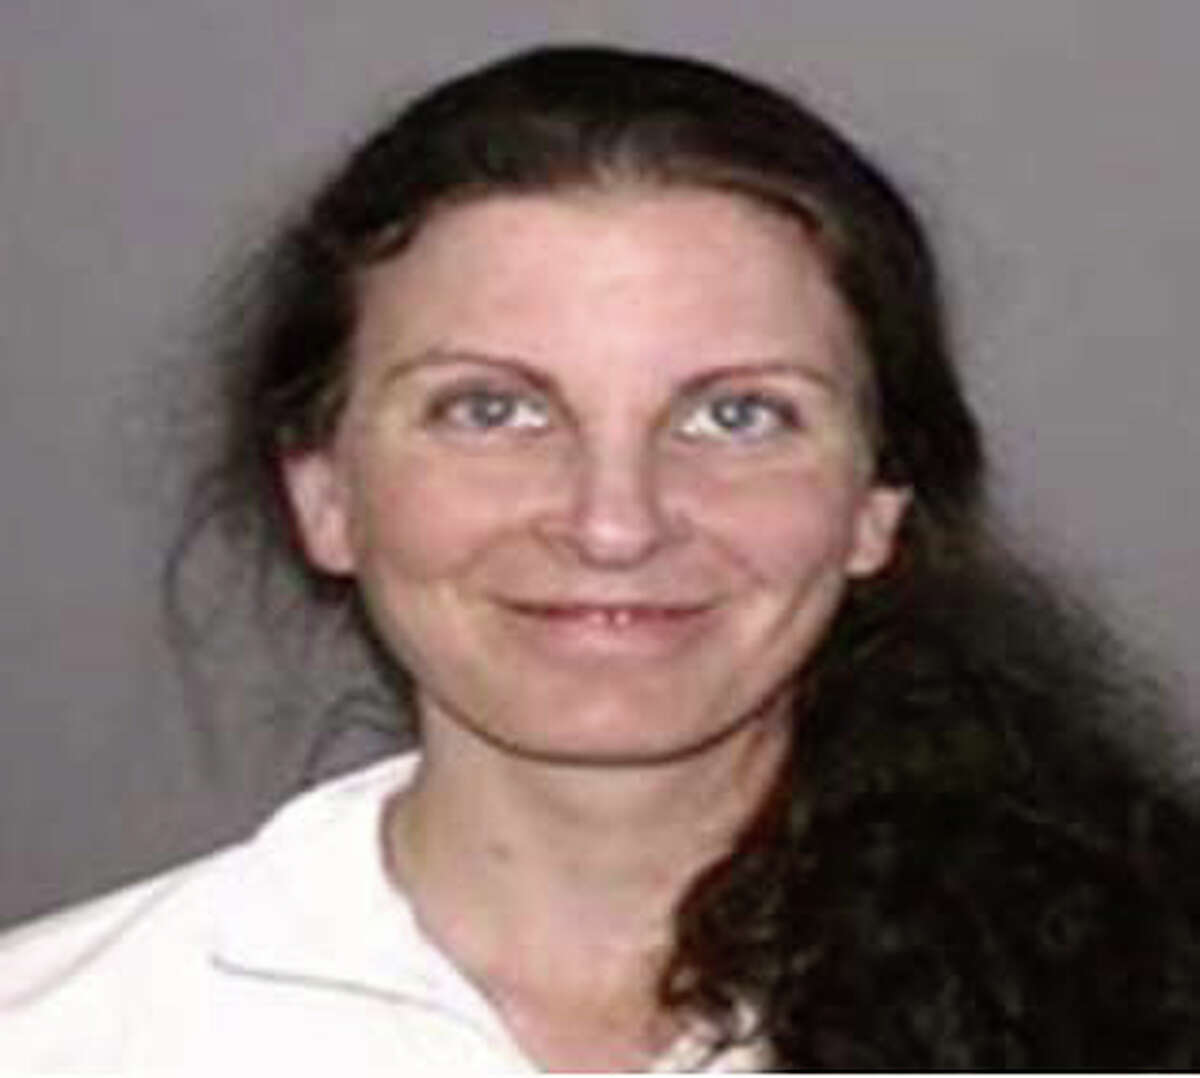 This photo of Clare Bronfman was submitted as evidence in the federal trial of Keith Raniere. (U.S. Department of Justice)